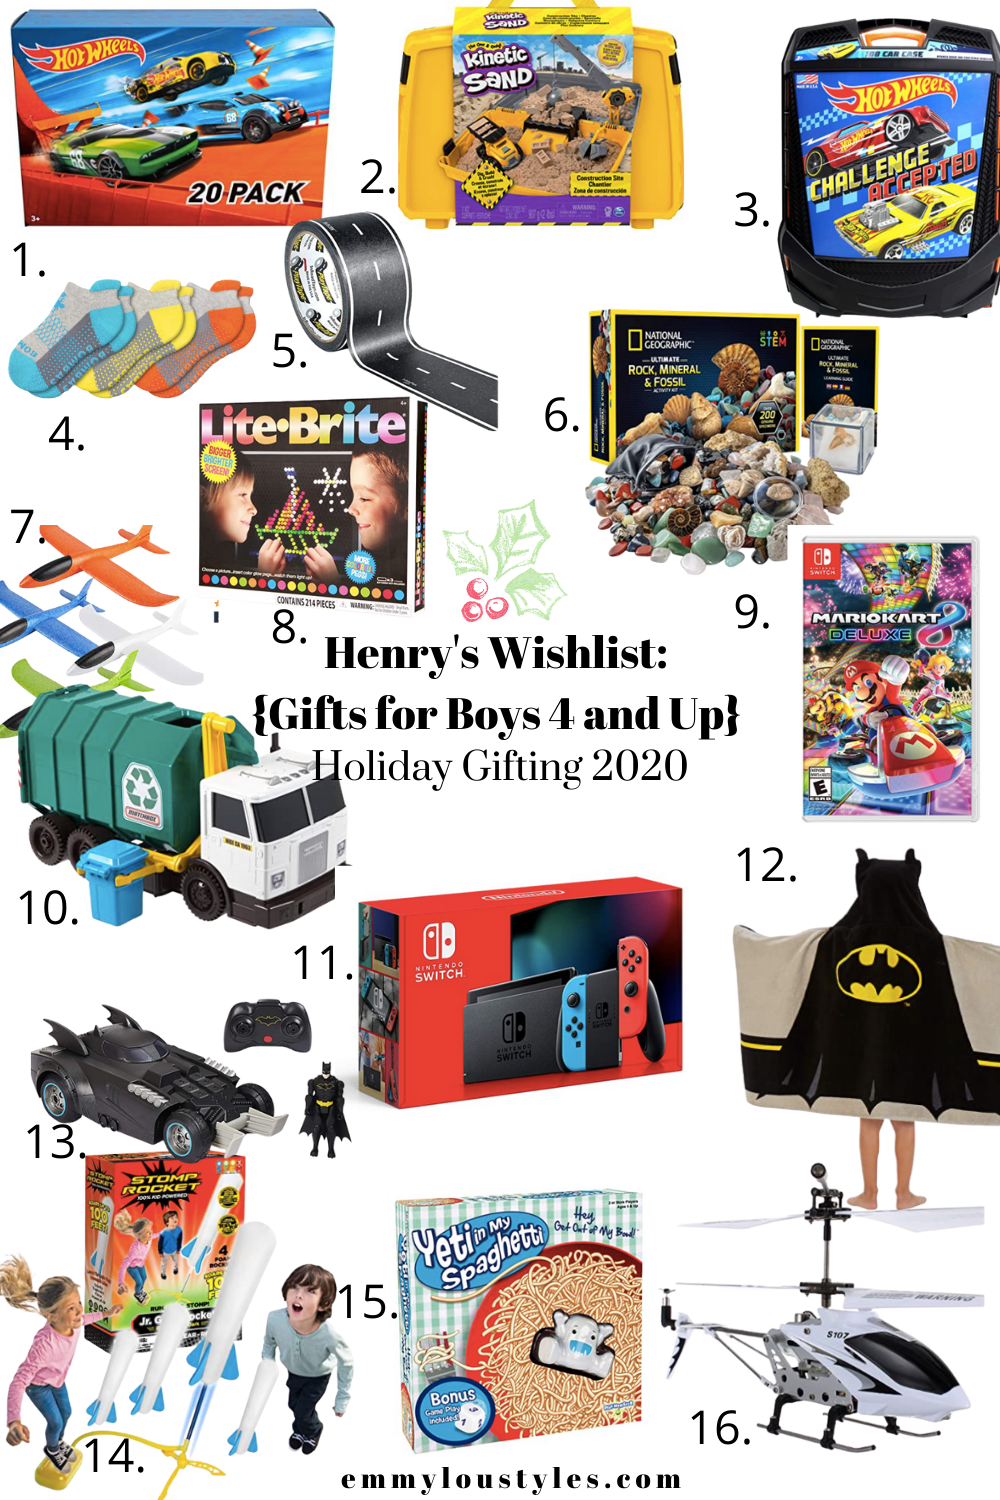 Gifts for boys ages 4 and up